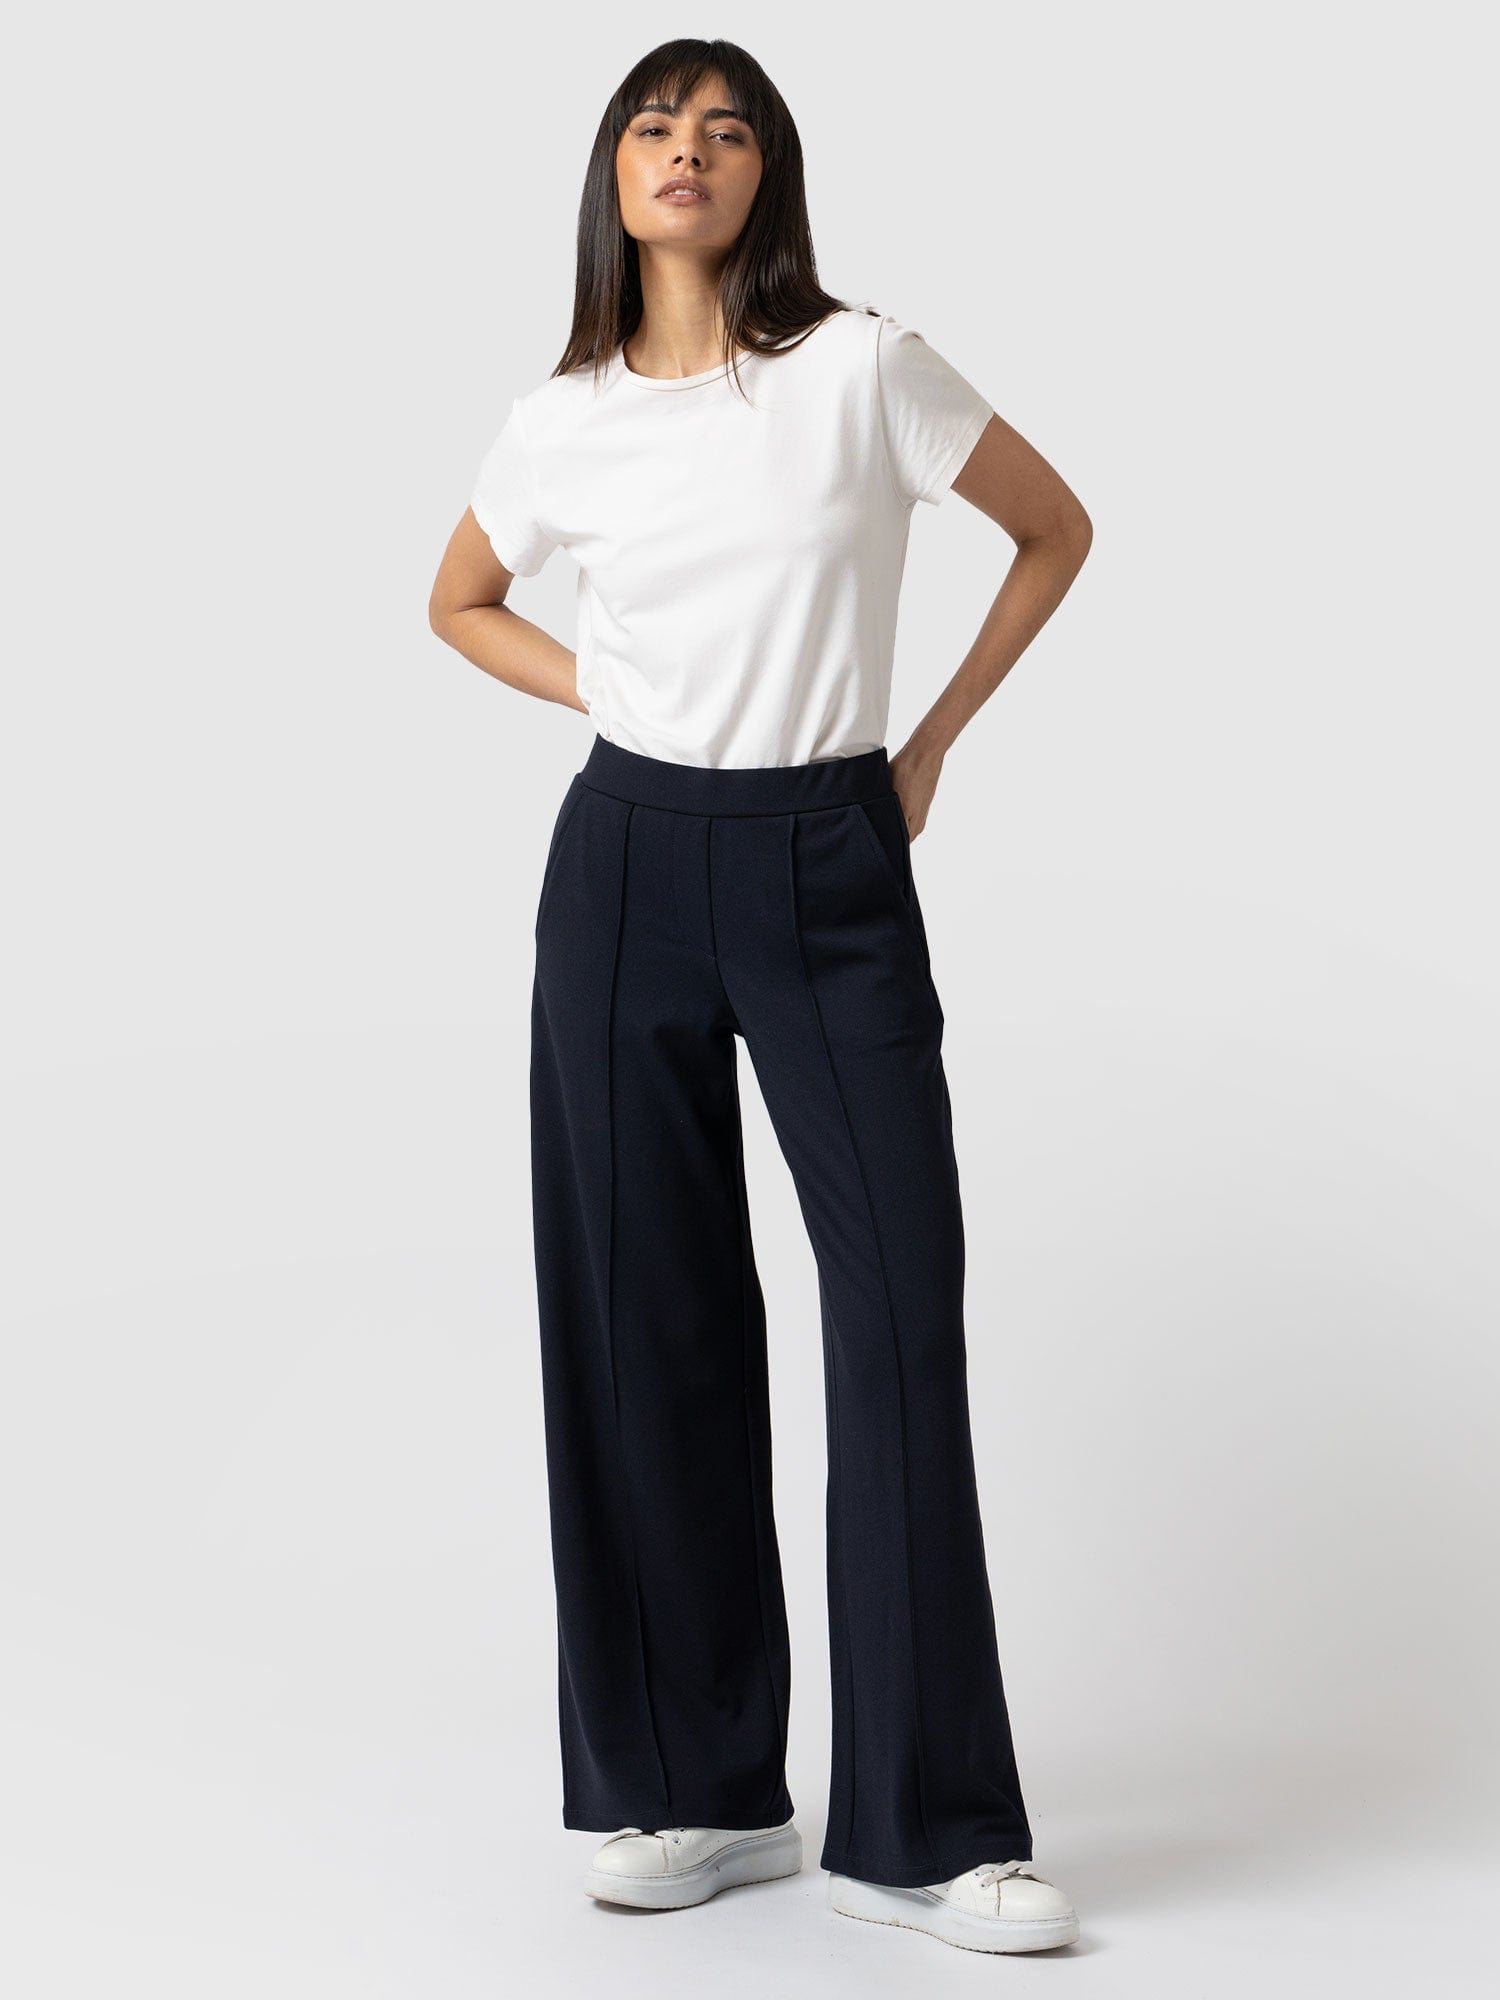 Navy Wide Leg Cashmere Trousers by Varana at ORCHARD MILE